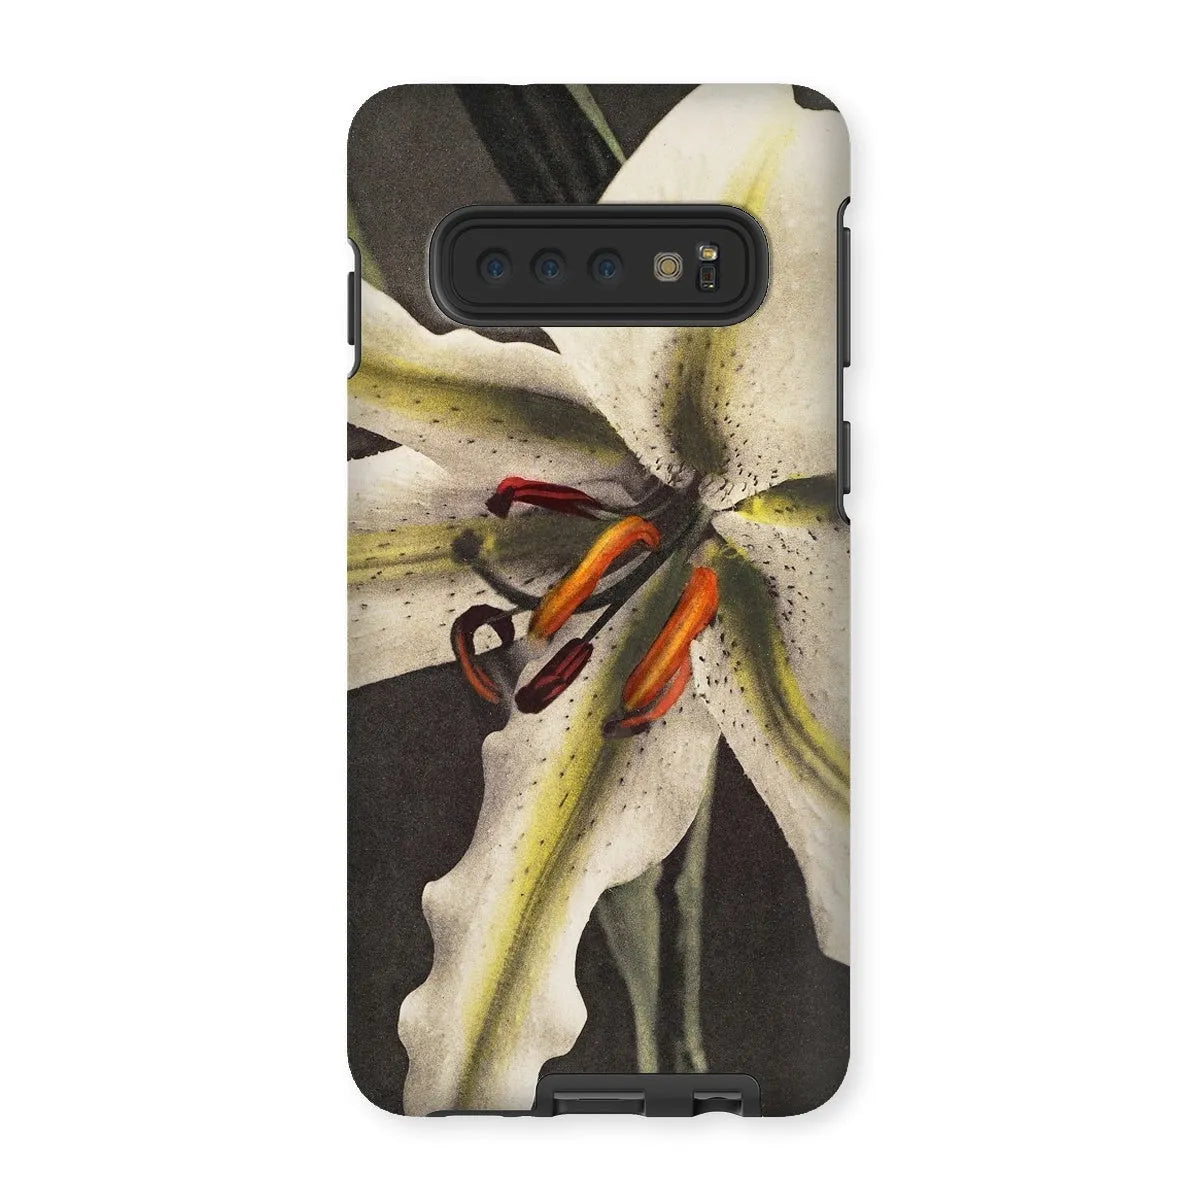 Lily By Kazumasa Ogawa Art Phone Case - Samsung Galaxy S10 / Matte - Mobile Phone Cases - Aesthetic Art